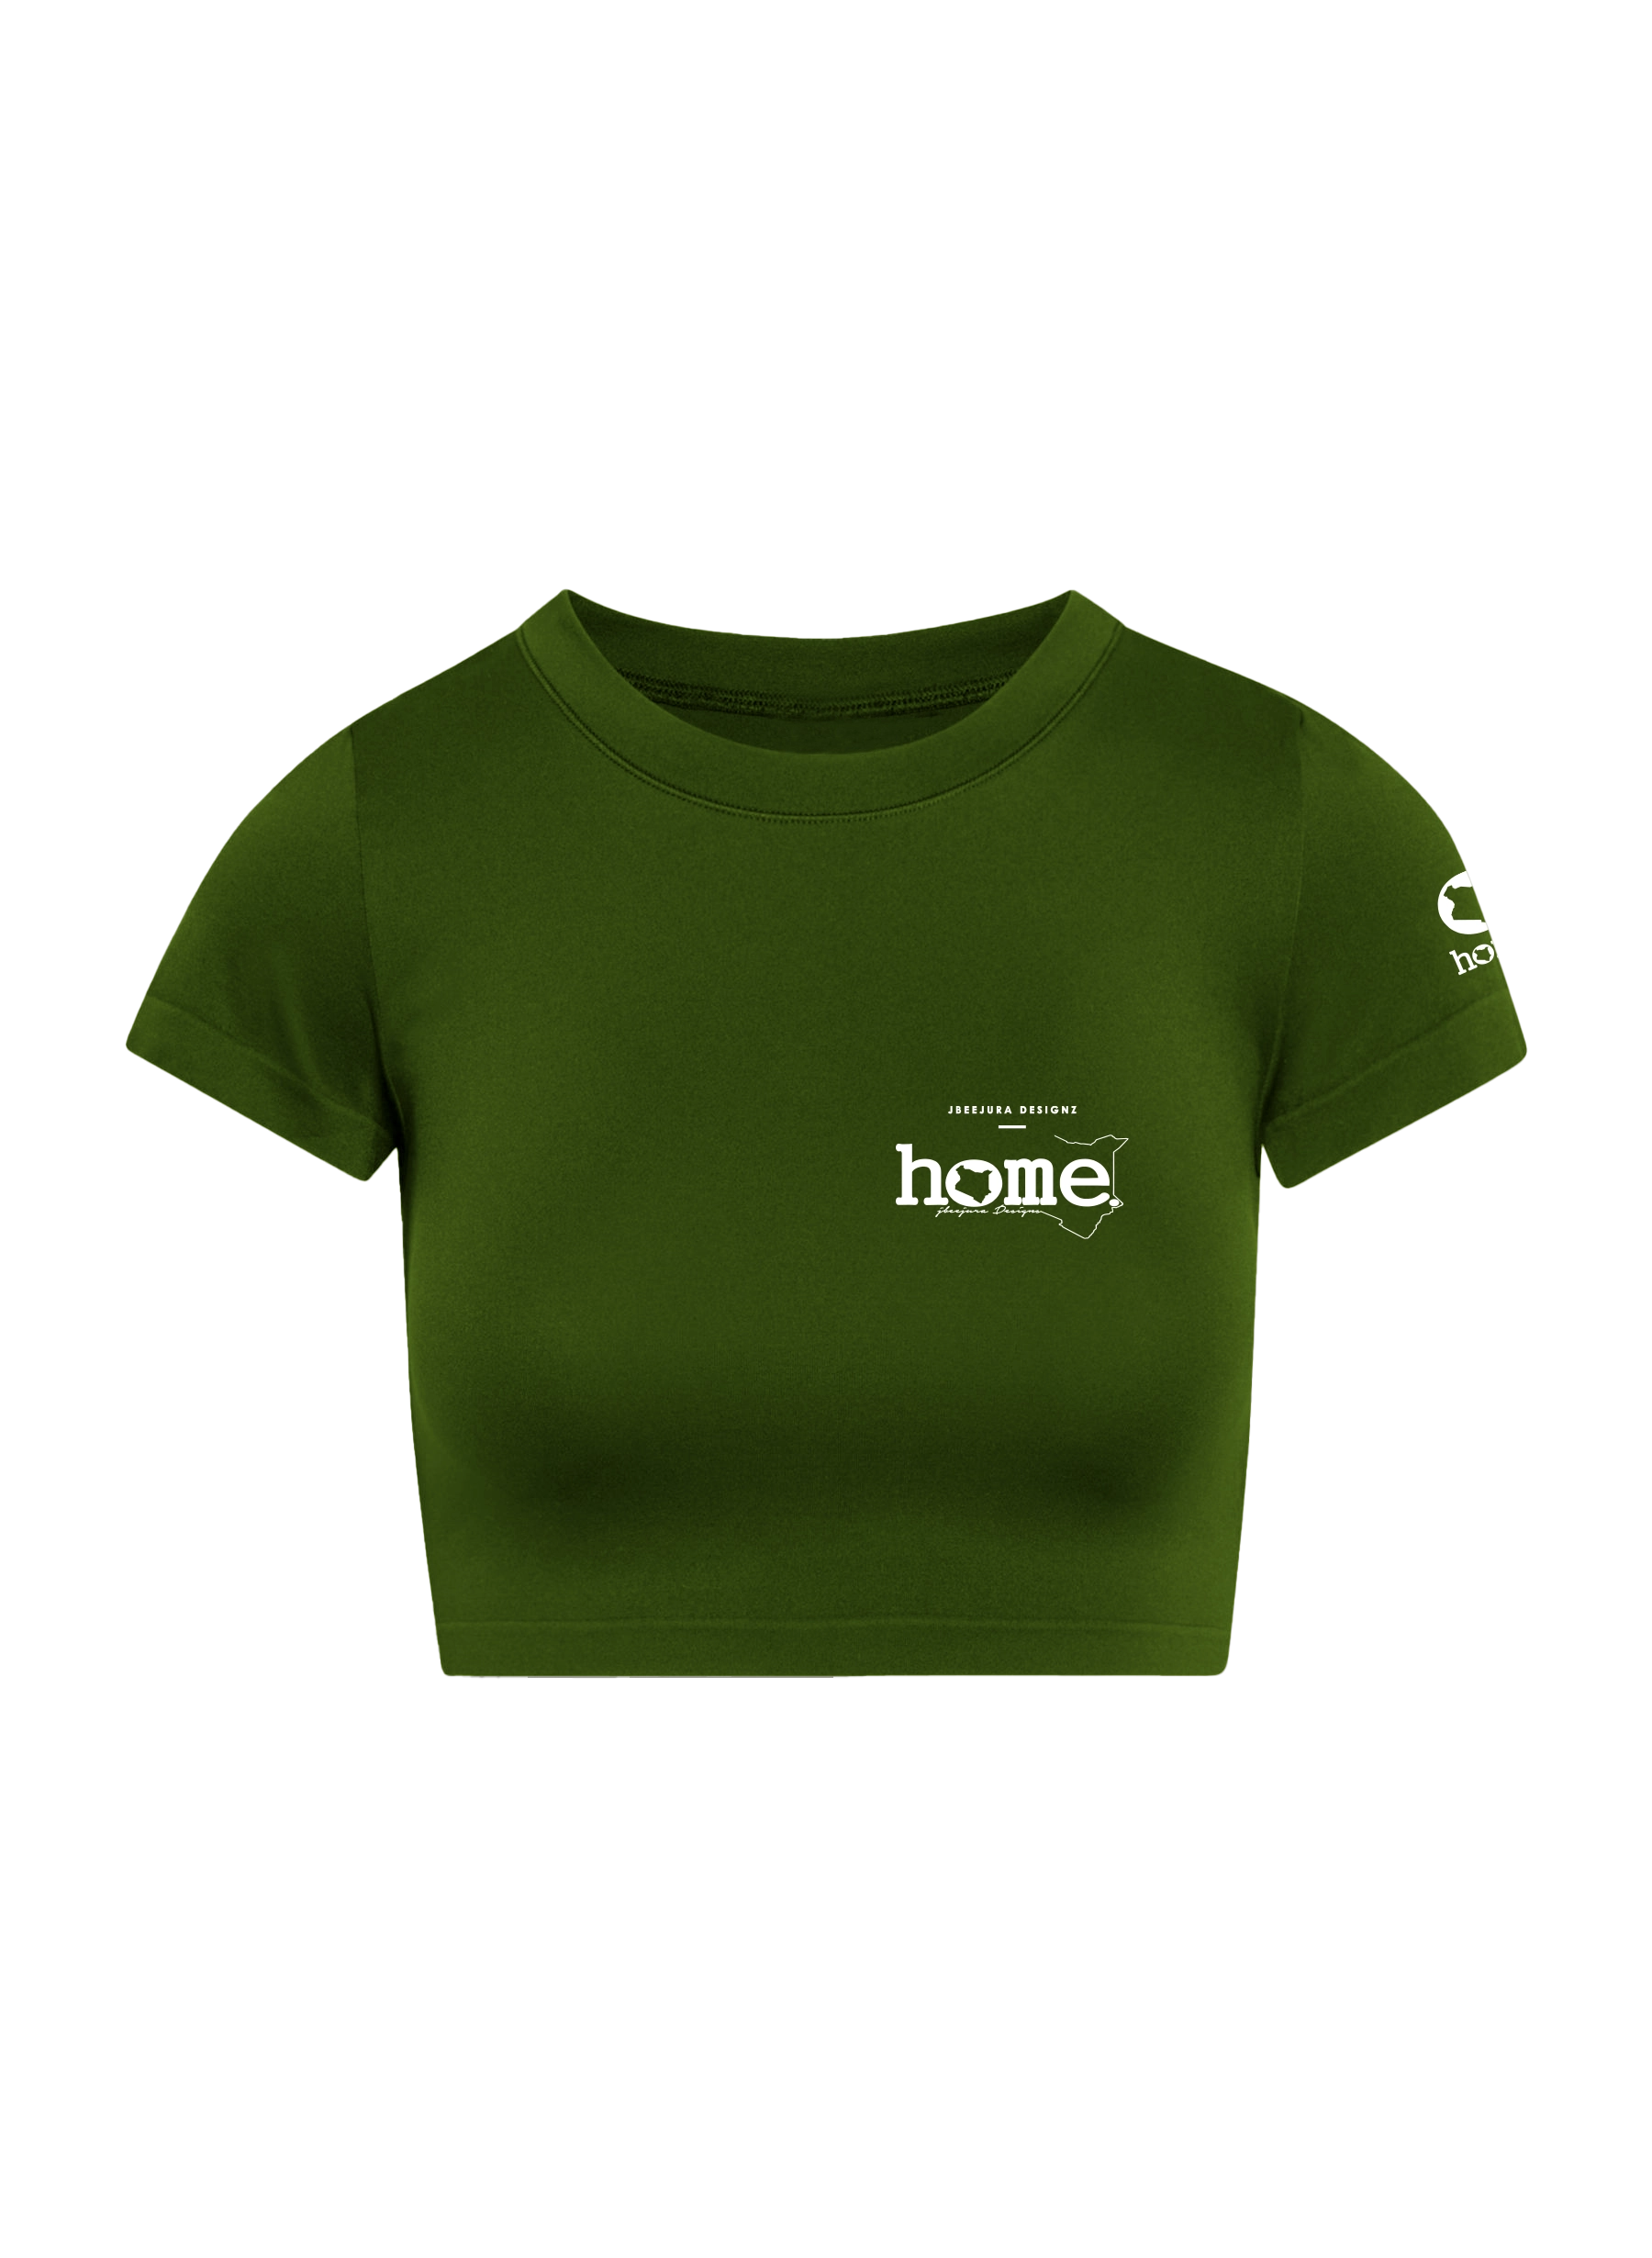 home_254 SHORT SLEEVED JUNGLE GREEN CROPPED ARIA TEE WITH A WHITE 3D WORDS PRINT